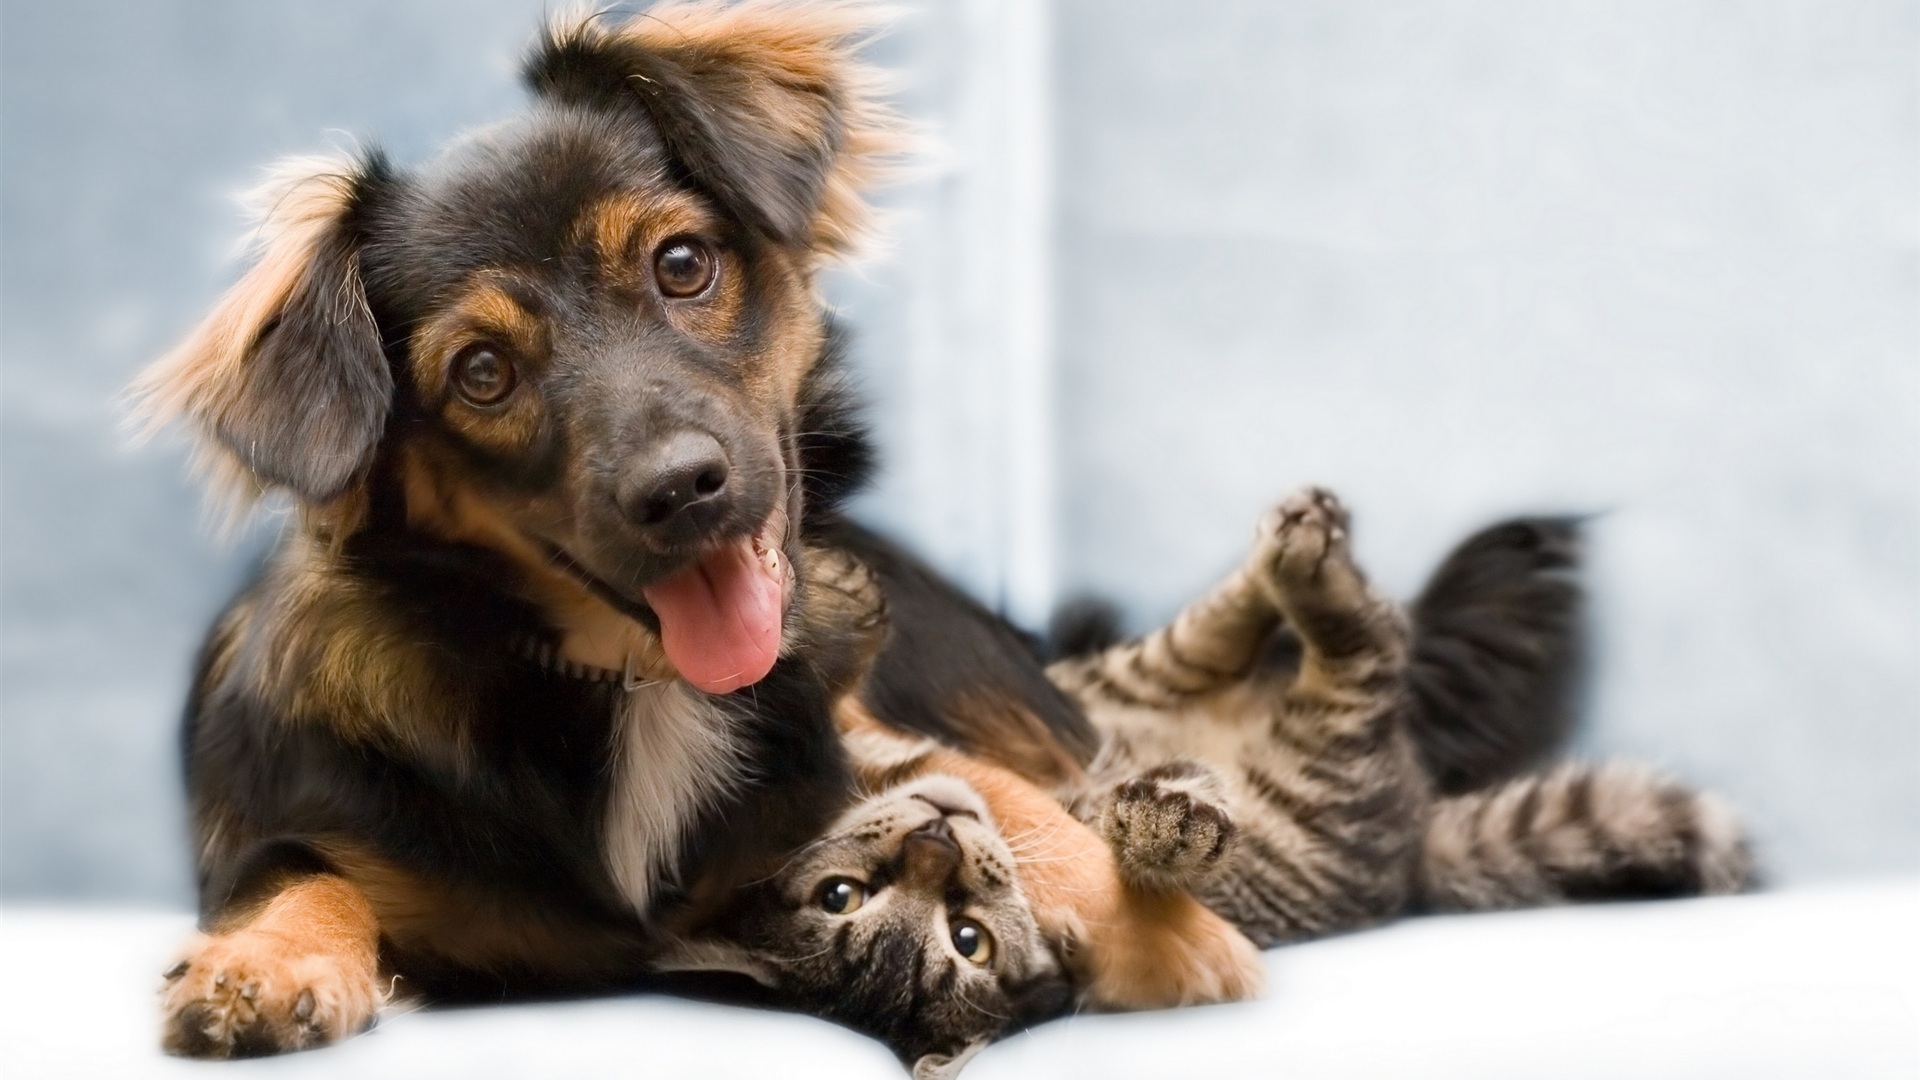 Pictures Of Dogs And Cats Together Funny